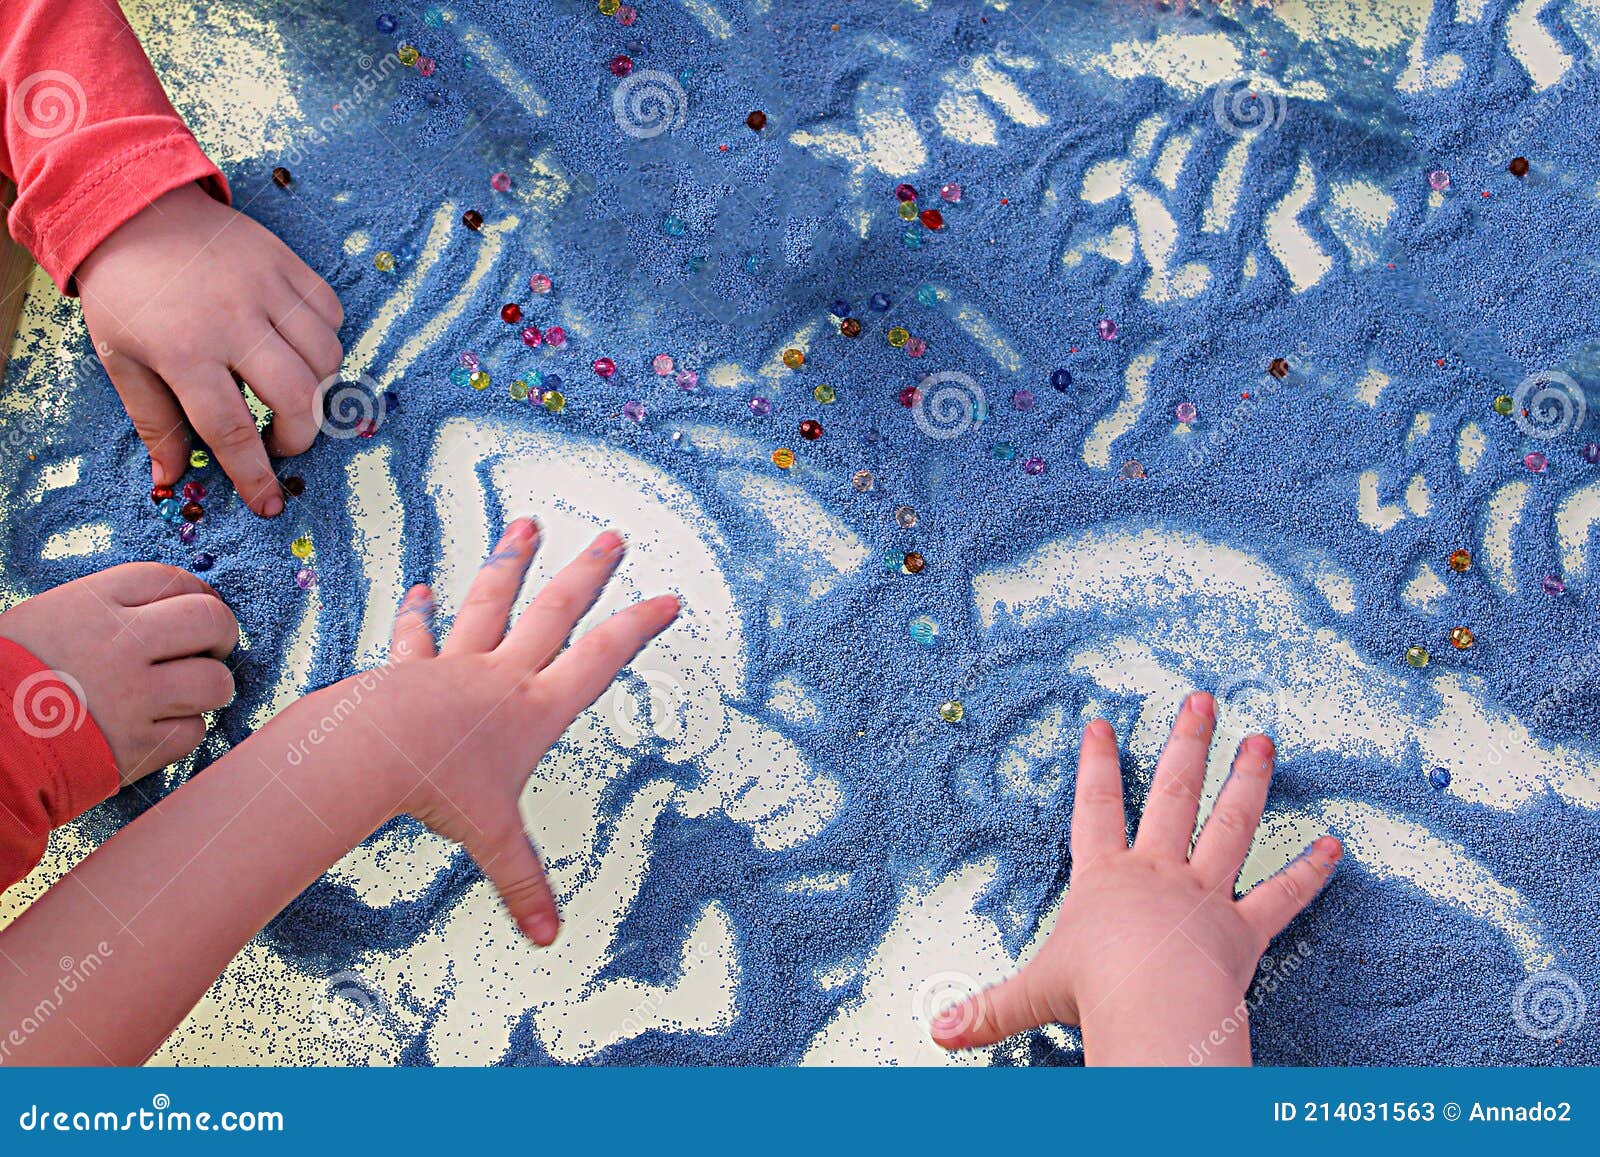 childrens hands touching blue sand on white table sand therapy, development of fine motor skills